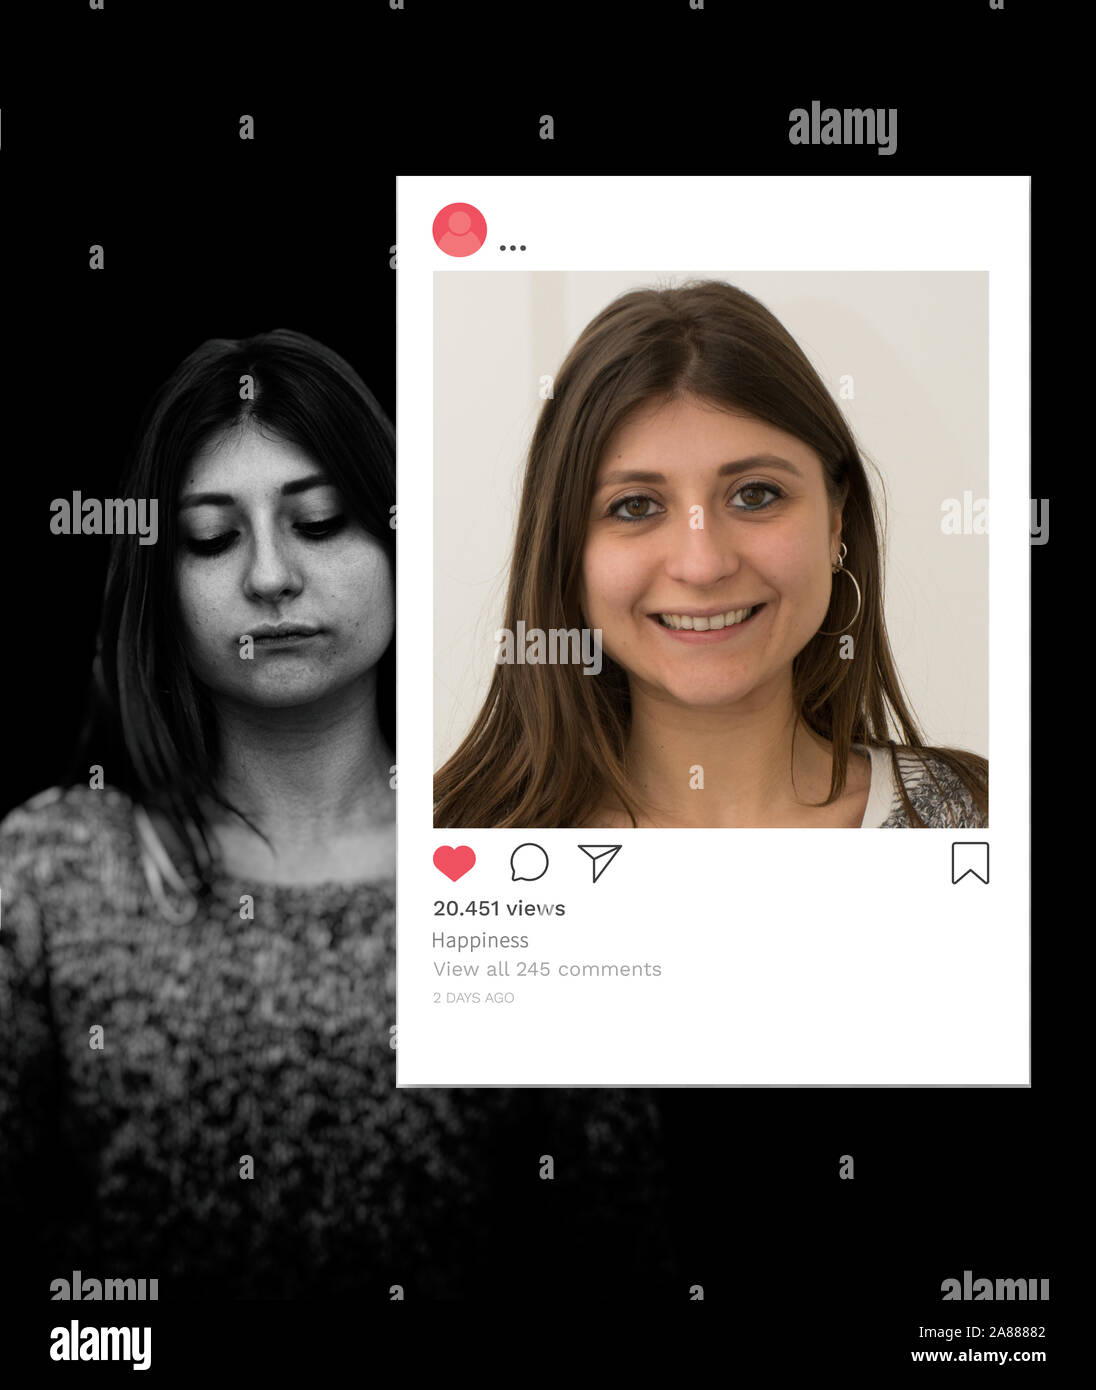 Young Caucasian girl suffering and depressed appears smiling and happy on social networks. Concept of falsehood and hypocrisy of social networks Stock Photo